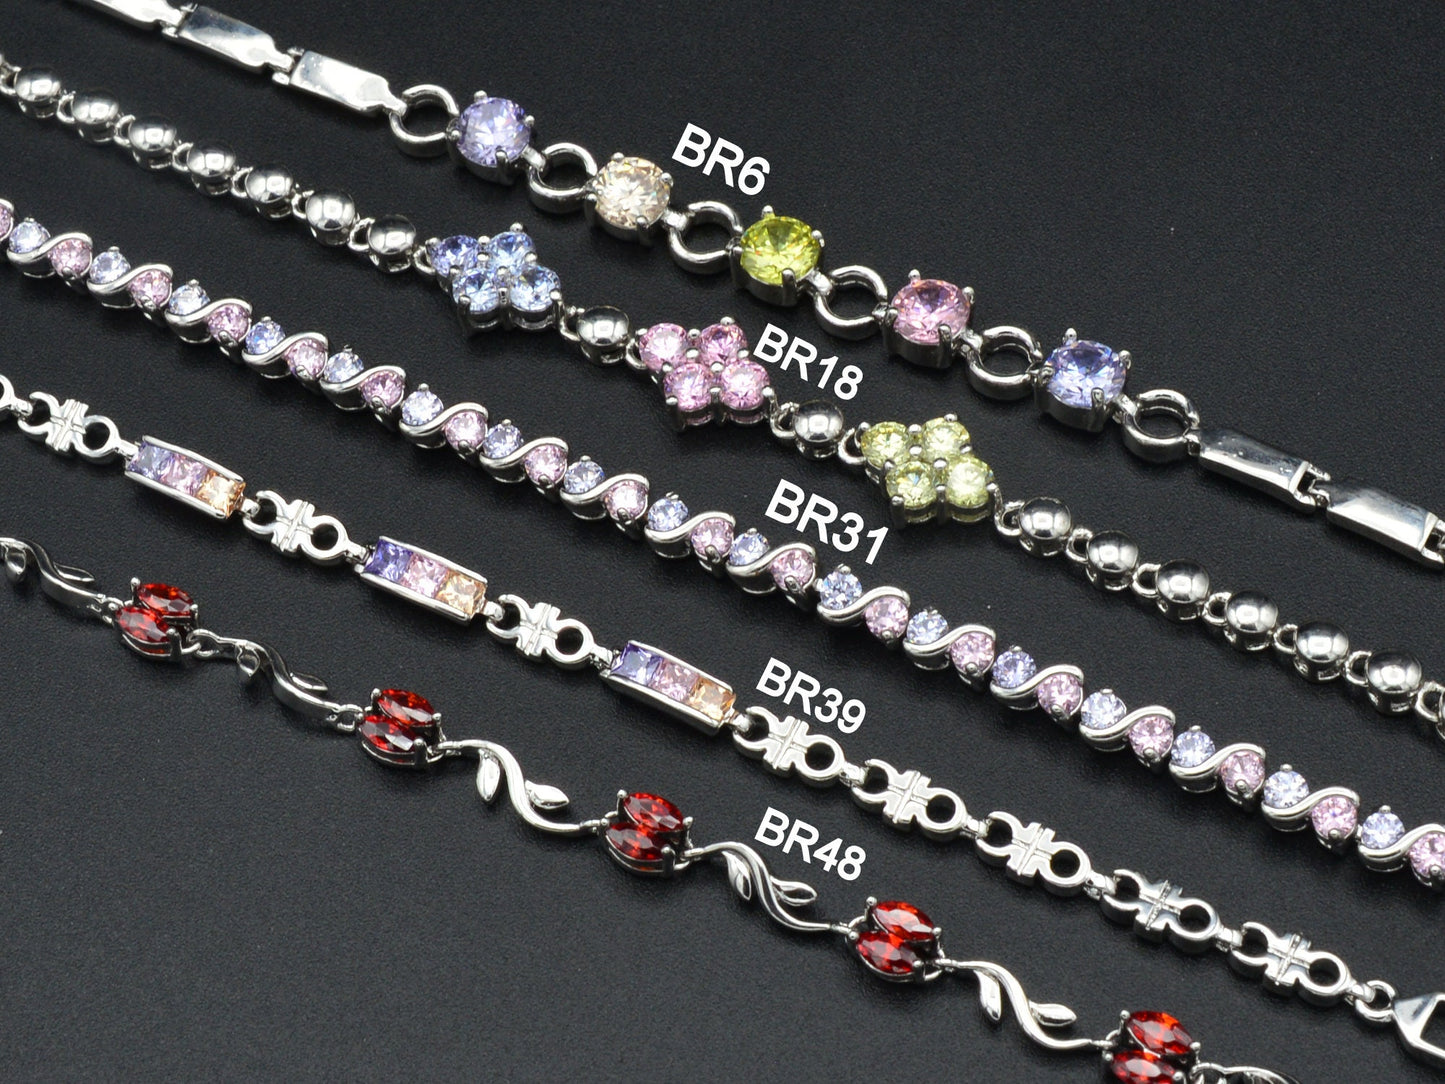 Women Silver Bracelet Rhodium Plated Link Chain Multi color Cubic Zirconia Flower, leaf design for Jewelry Making tarnish resistant